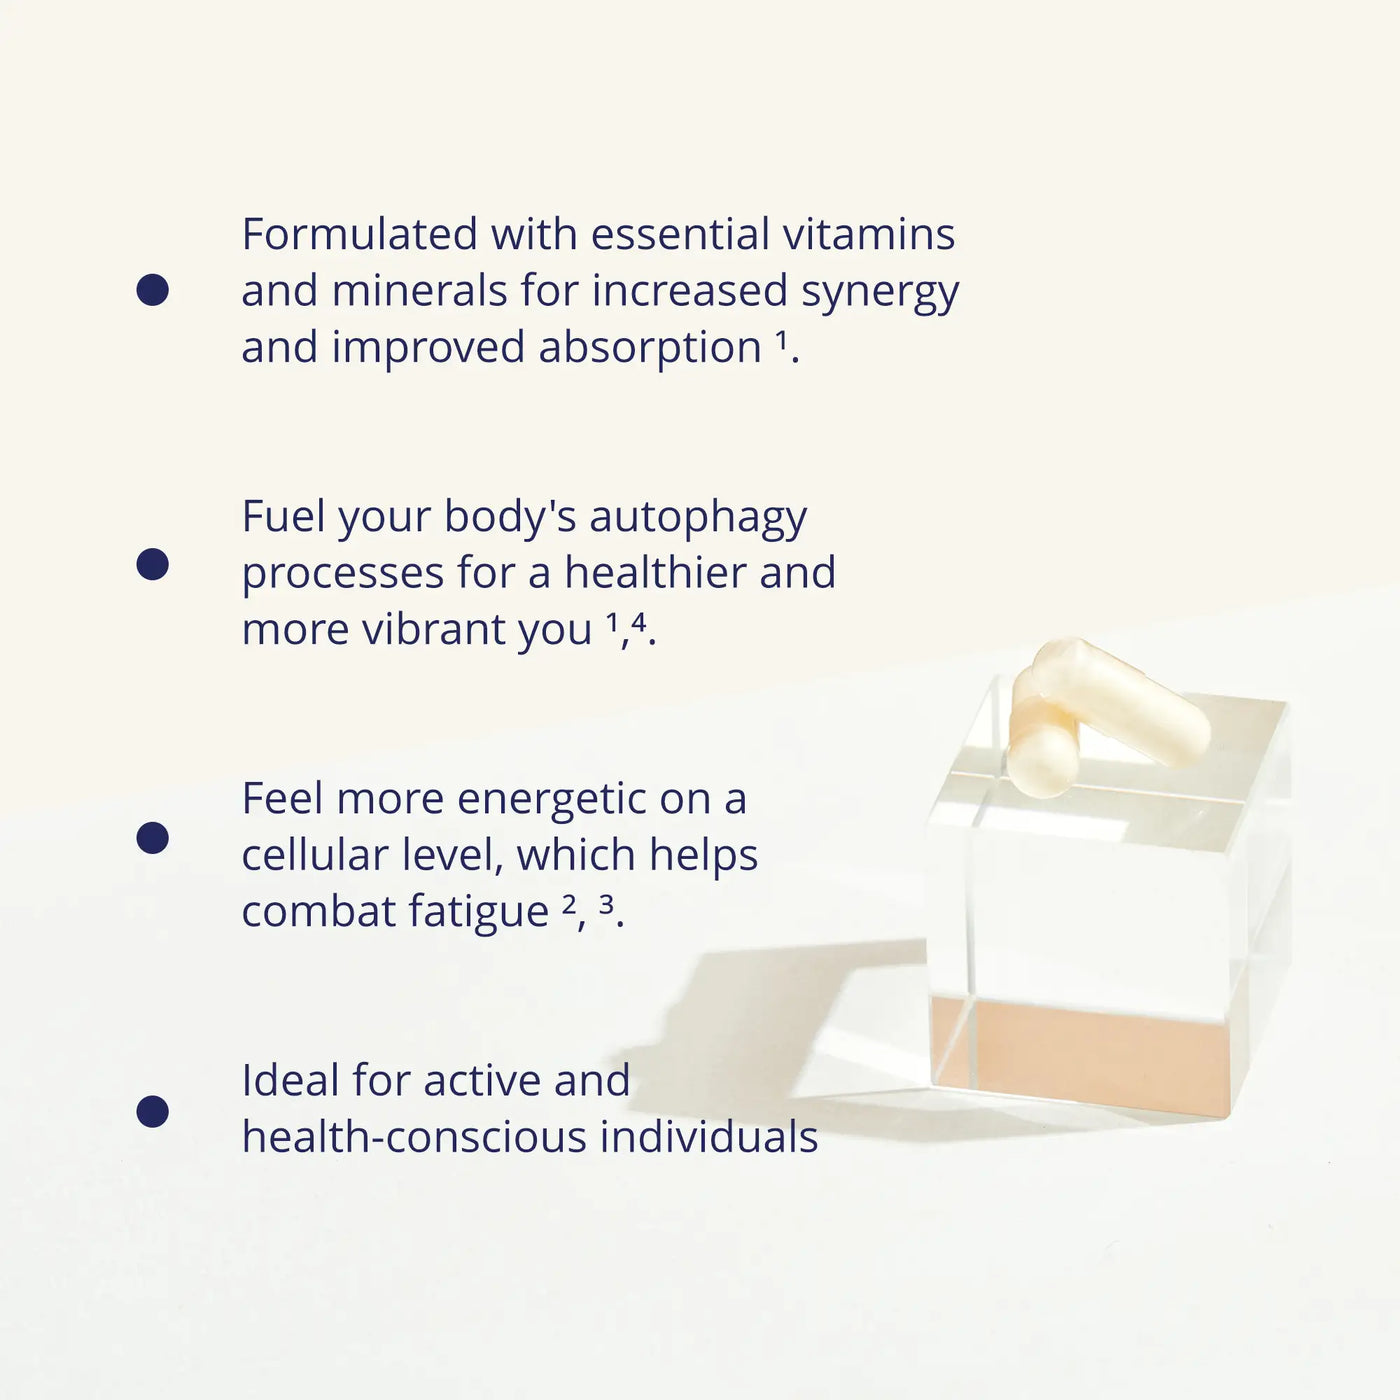 Spermidine fusion supplement benefits. Formulated with essential vitamins for increased synergy.